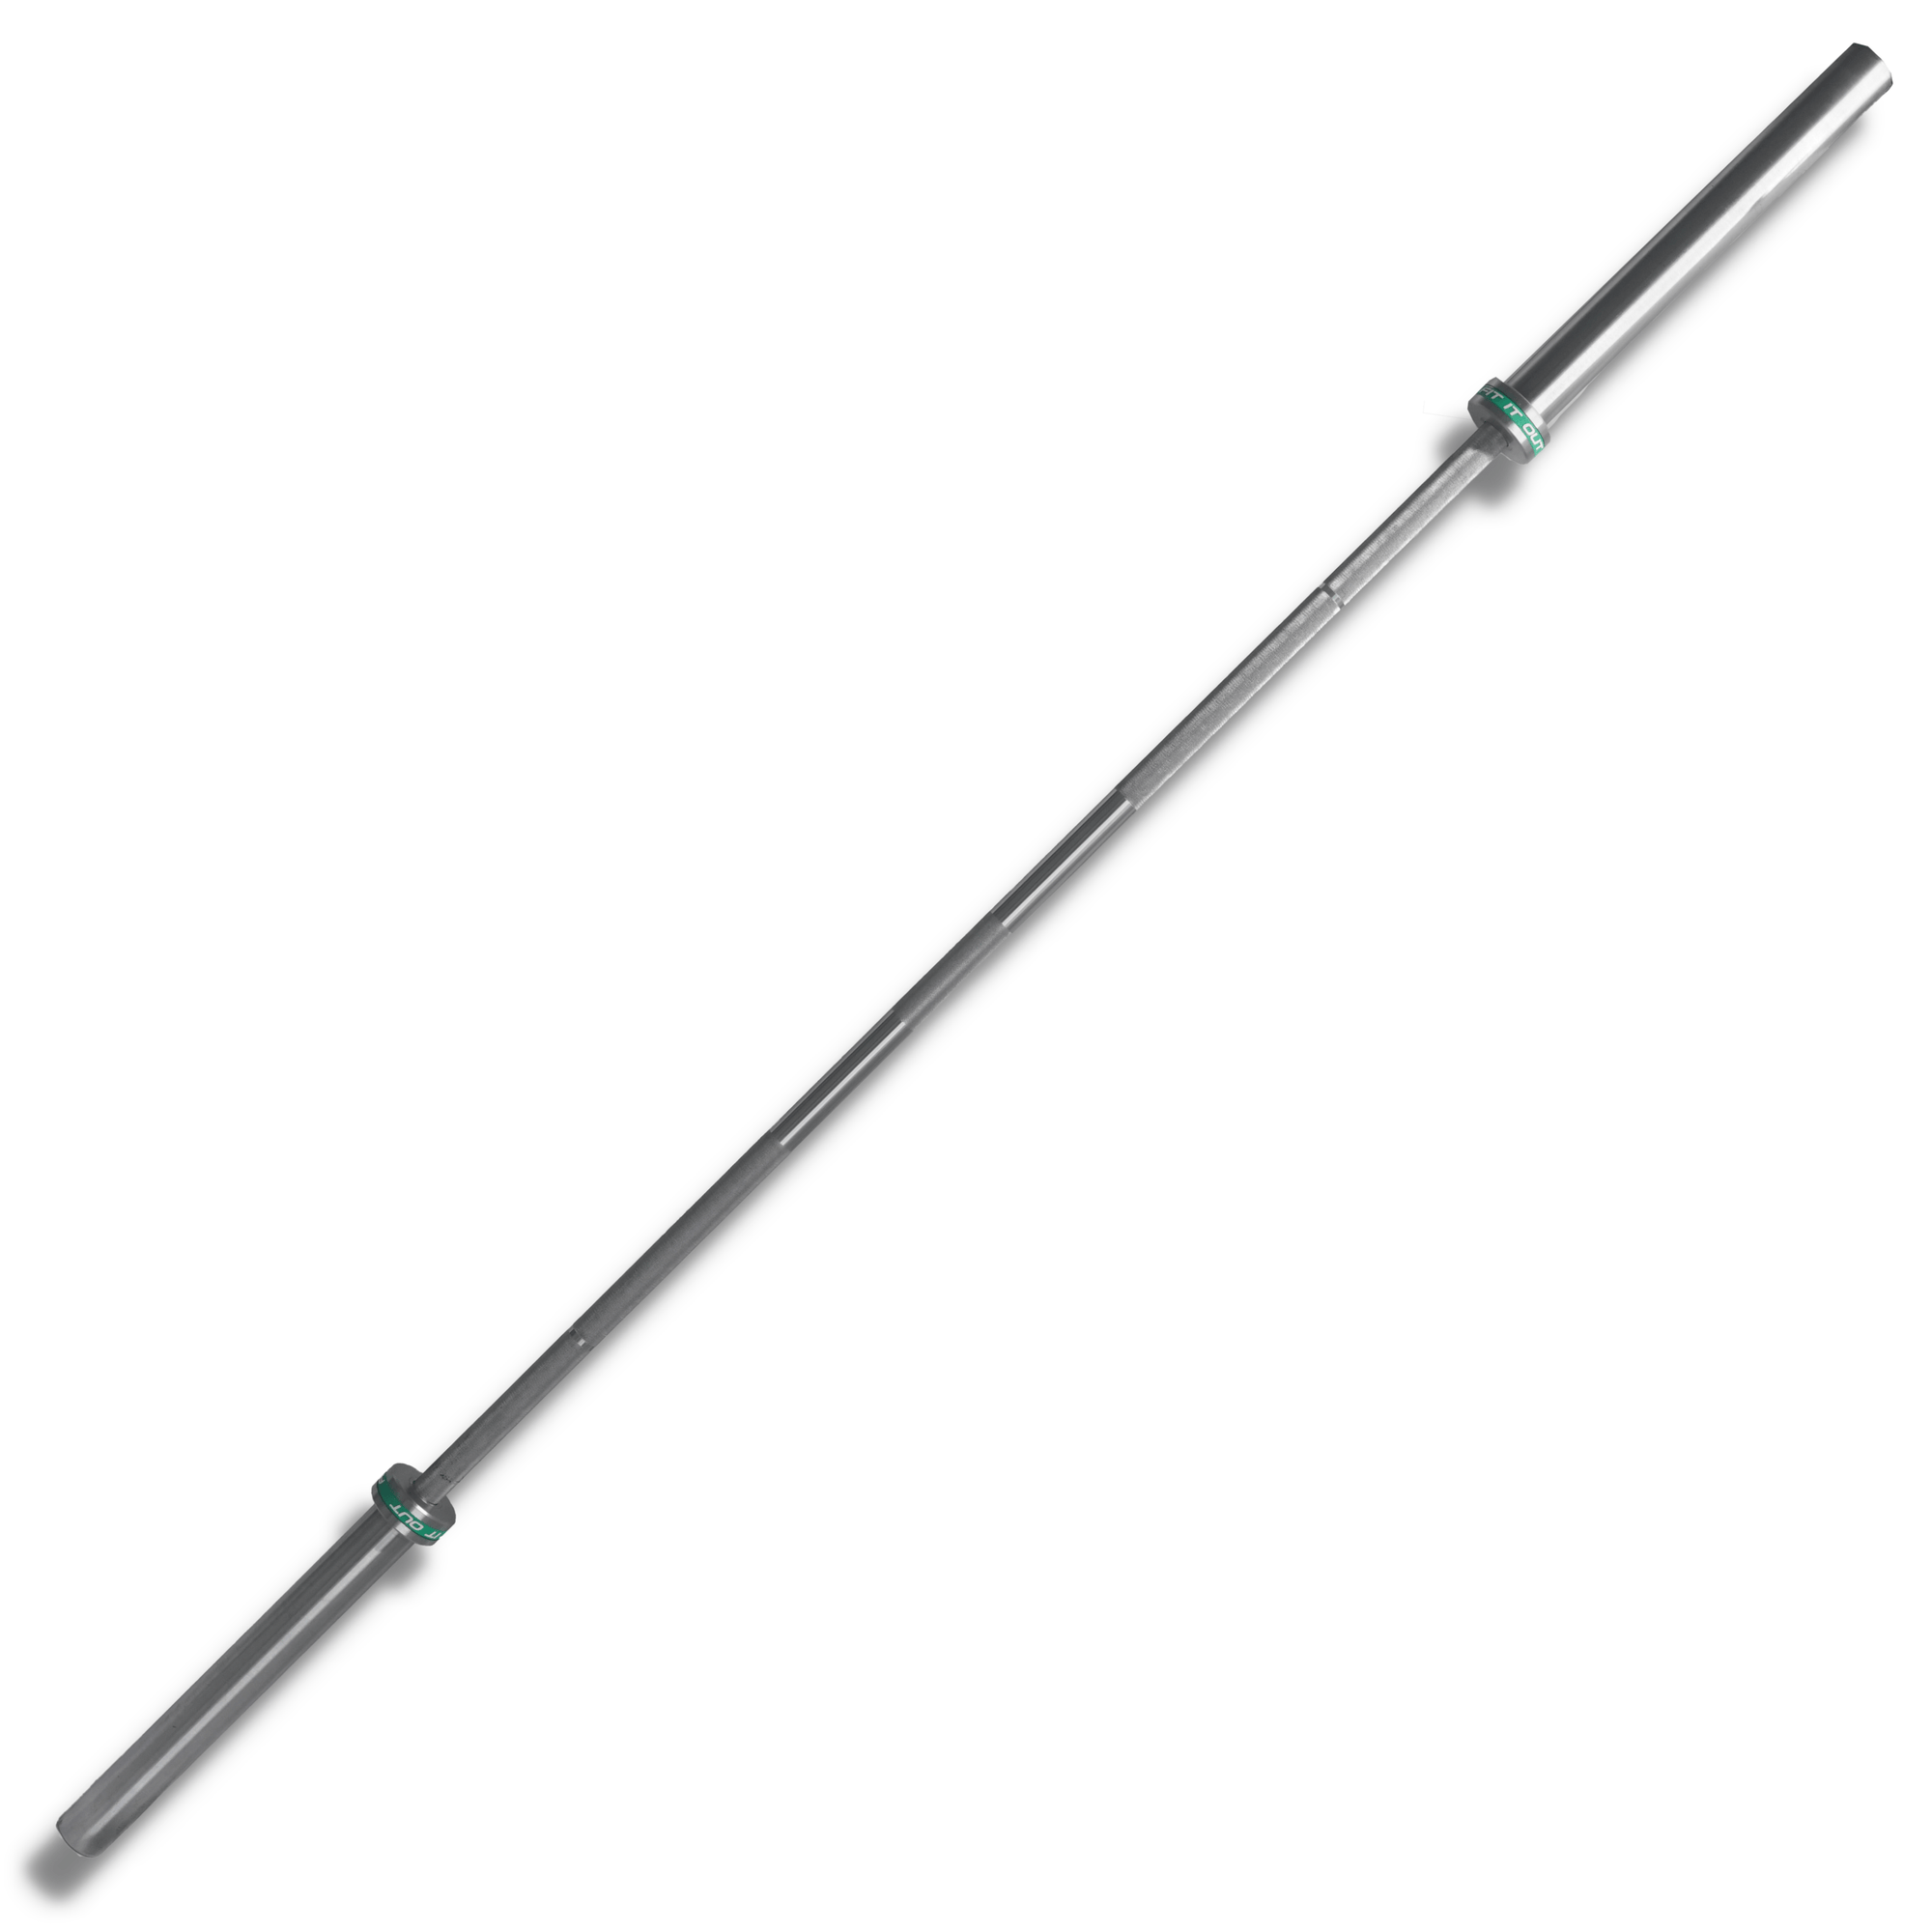 Fit It Out Shipment32 FIO Men's Olympic Barbell (20KG)